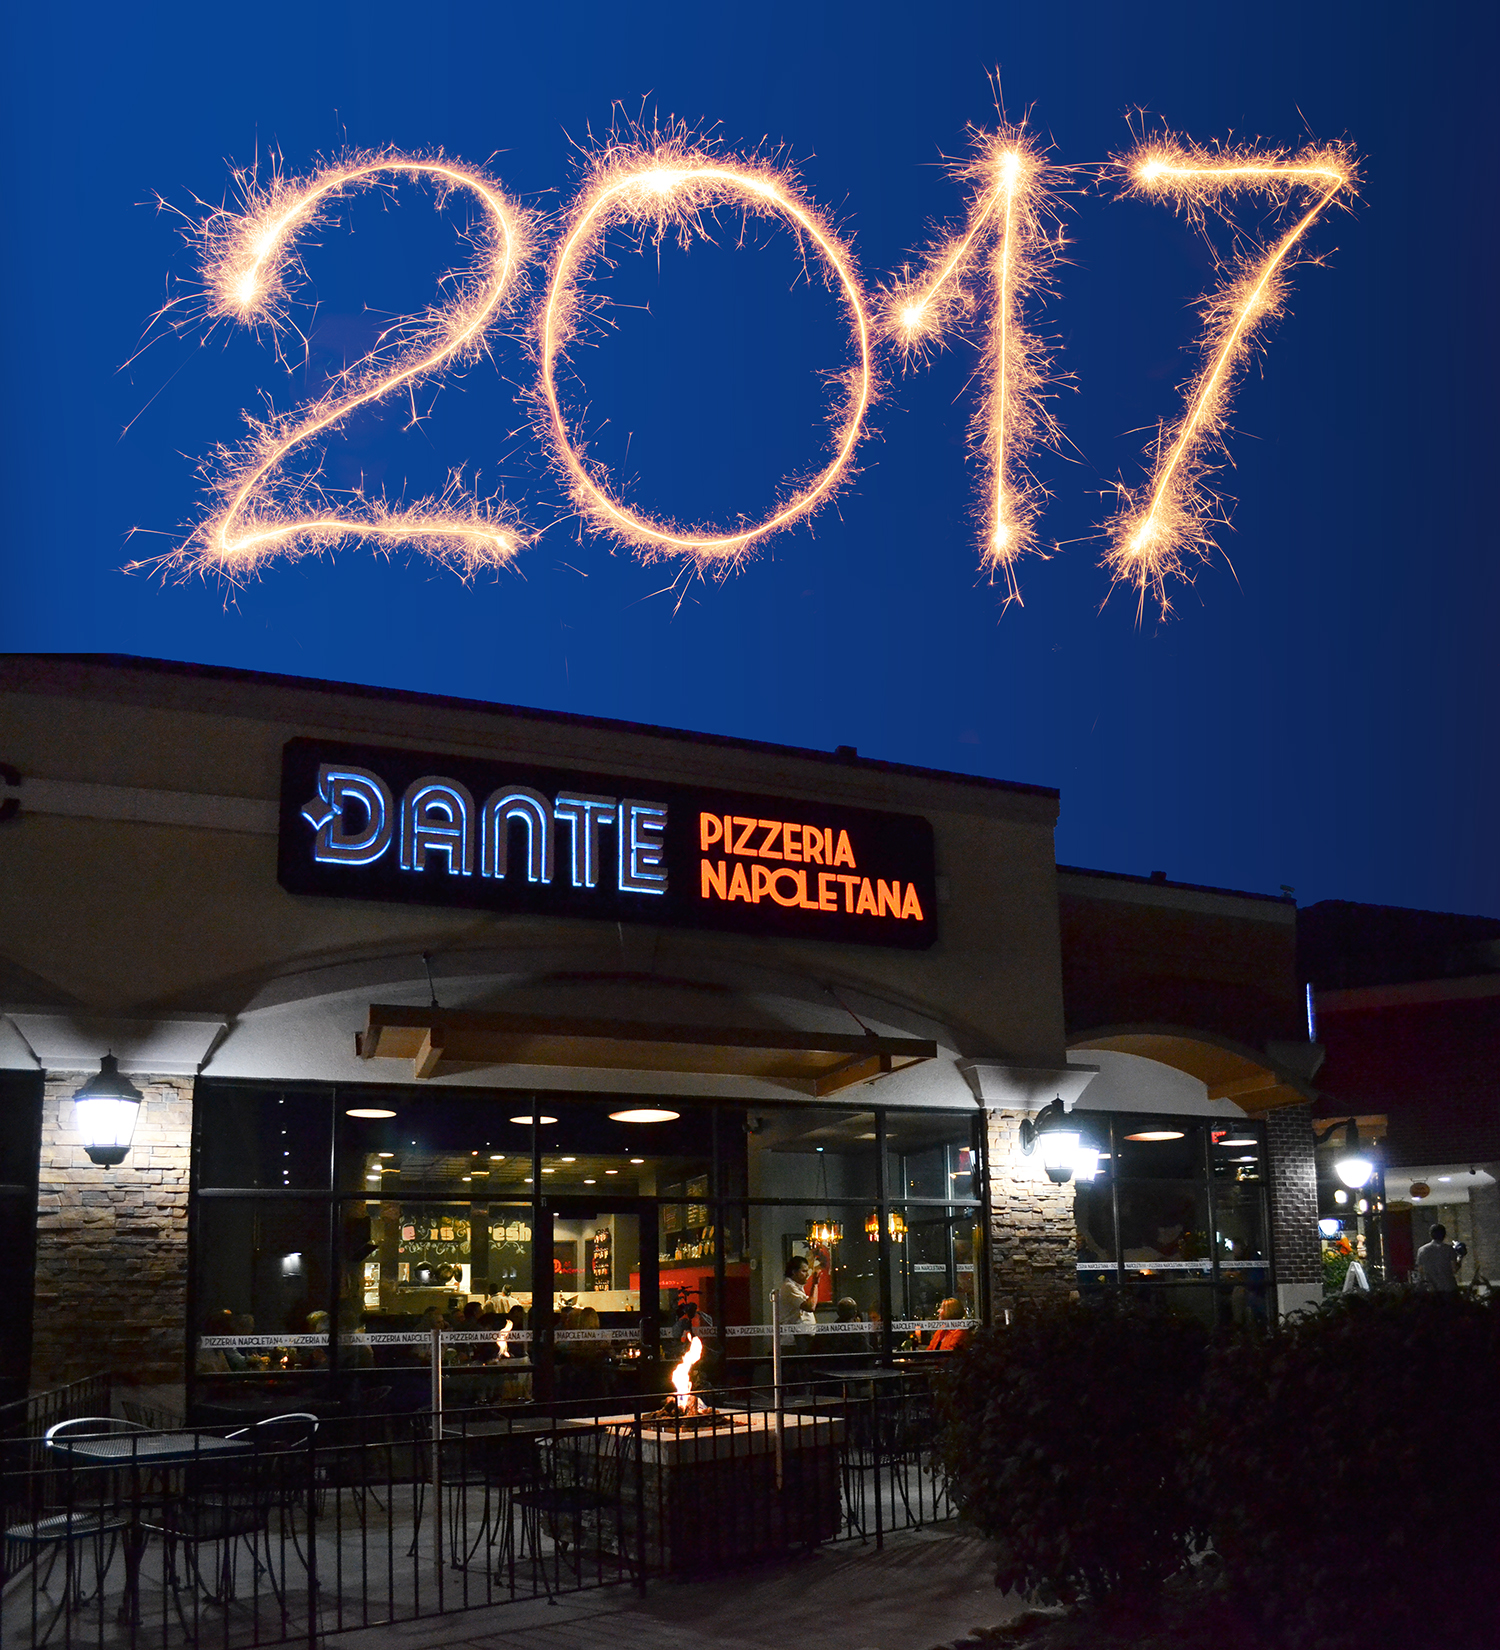 New Year’s Eve at Dante